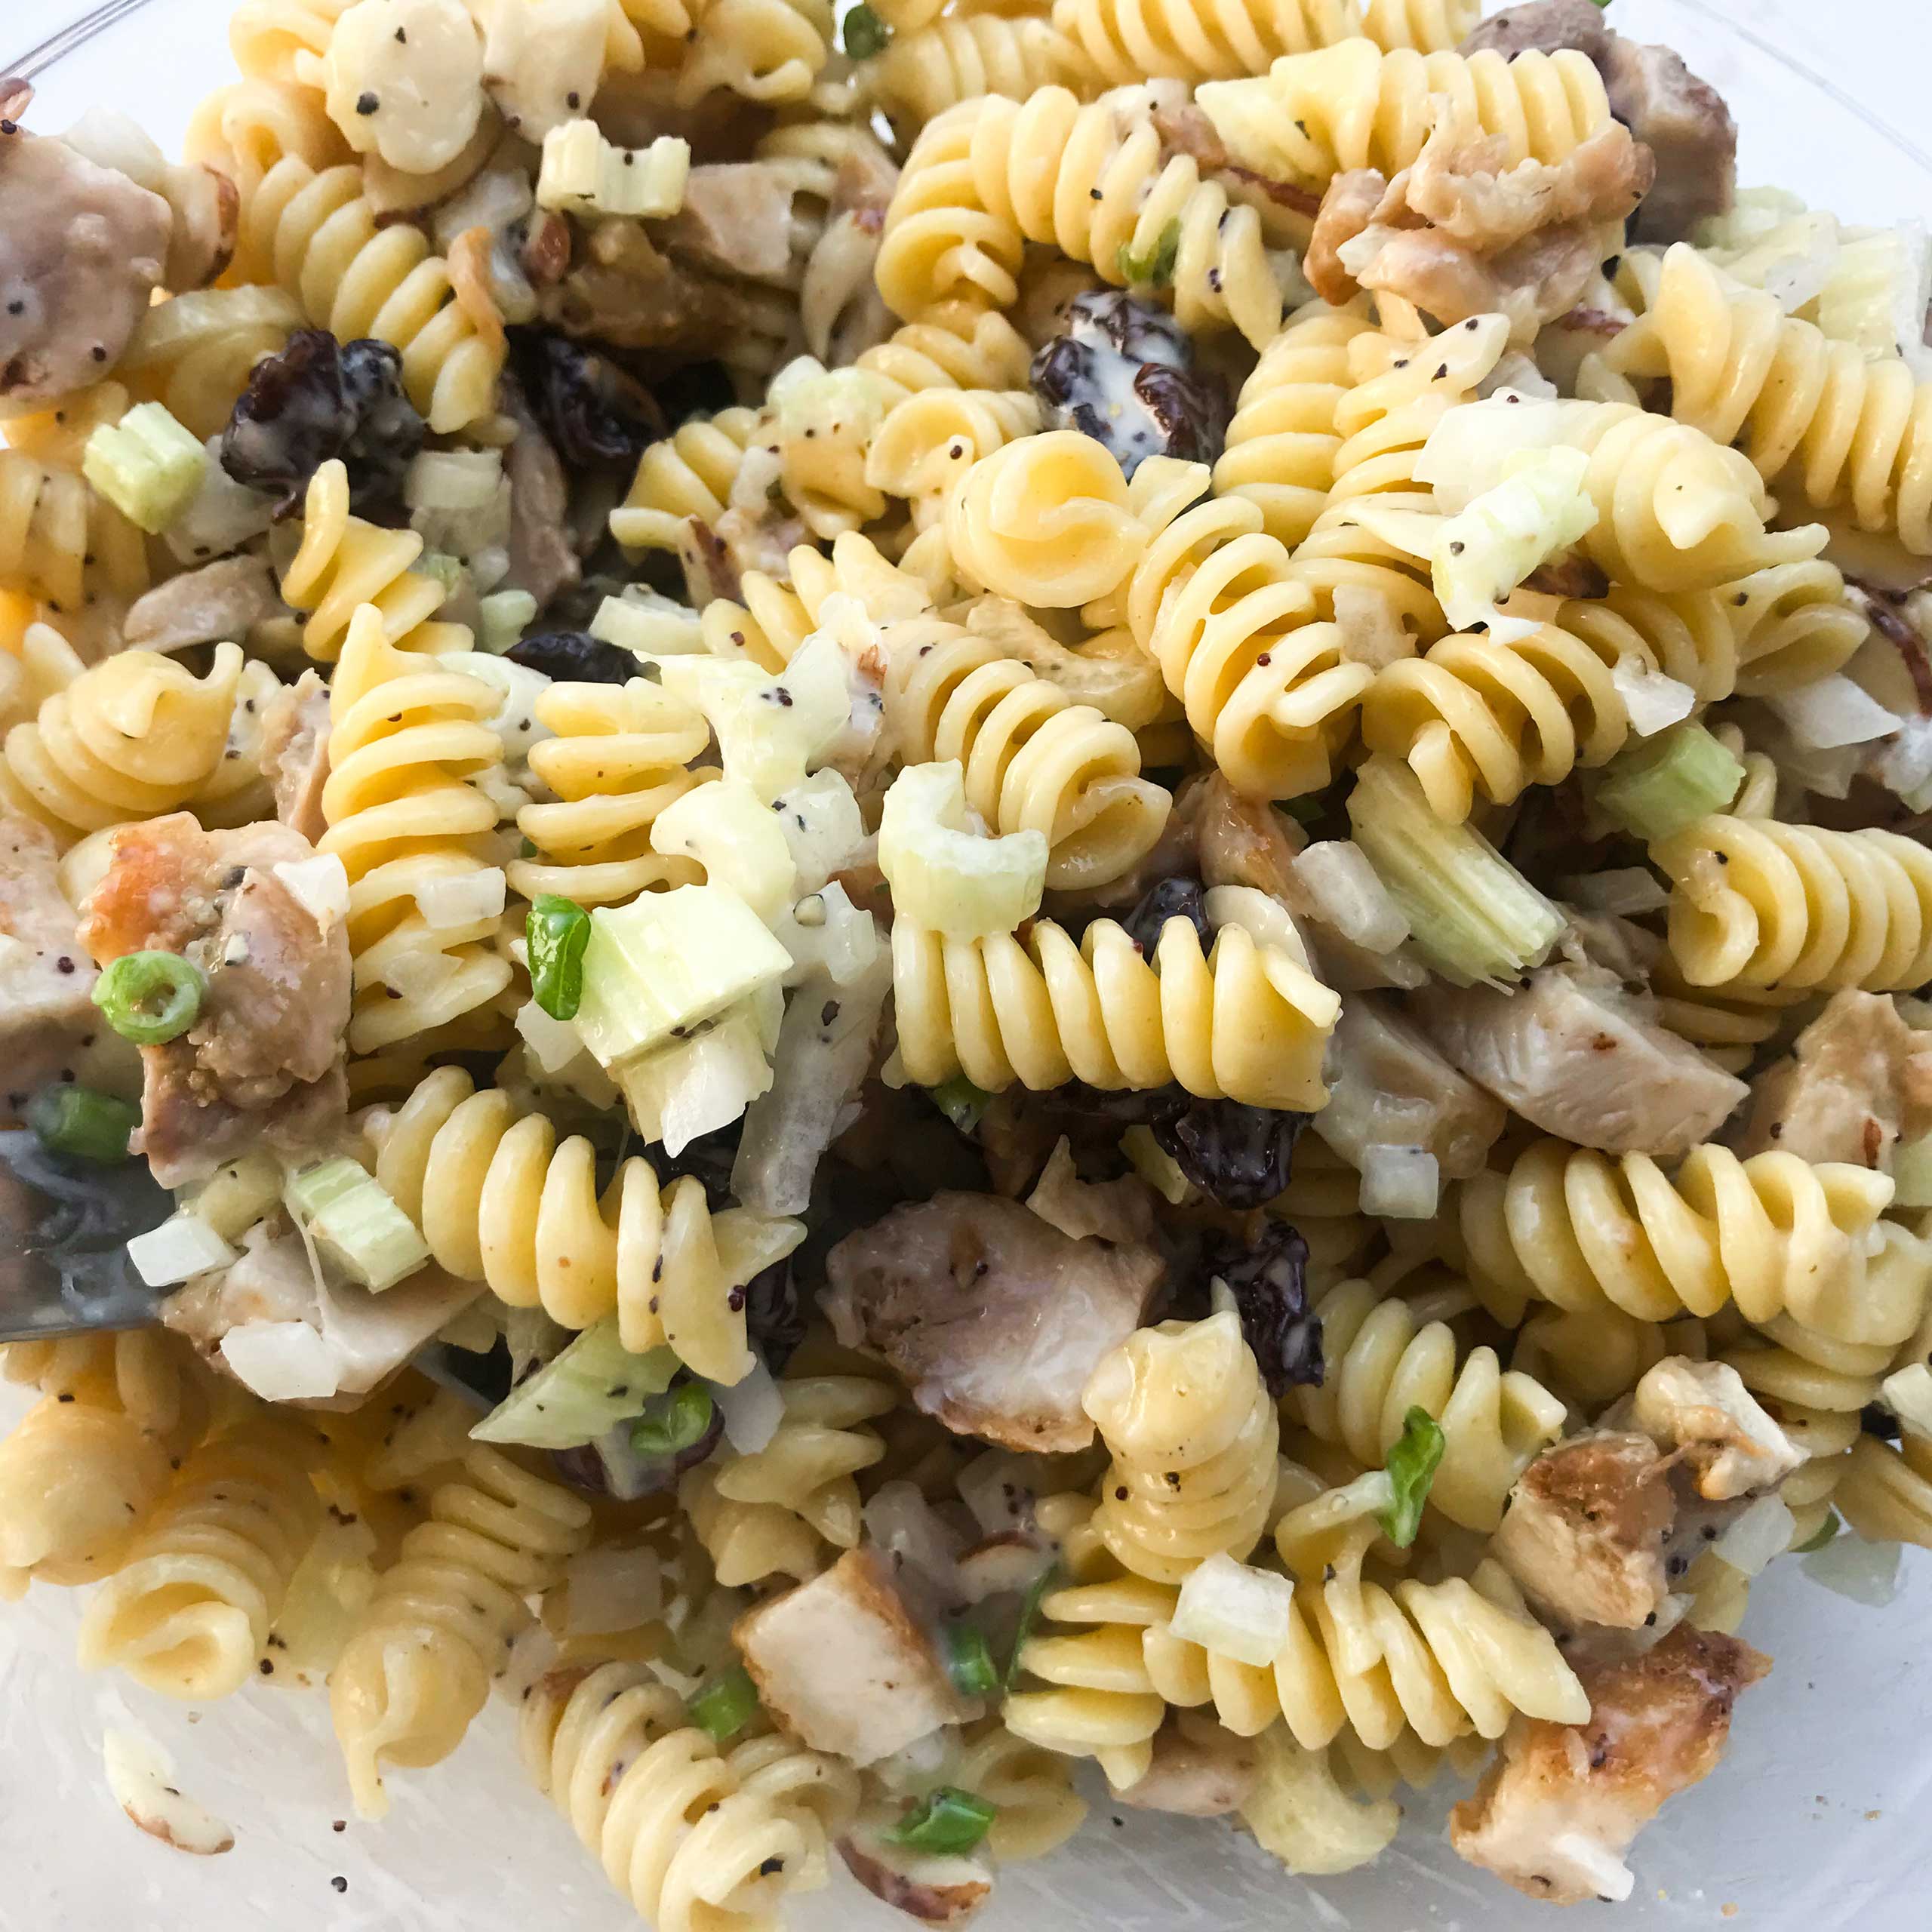 Poppyseed Pasta Salad with Chicken, Almonds & Cherries | My Curated Tastes